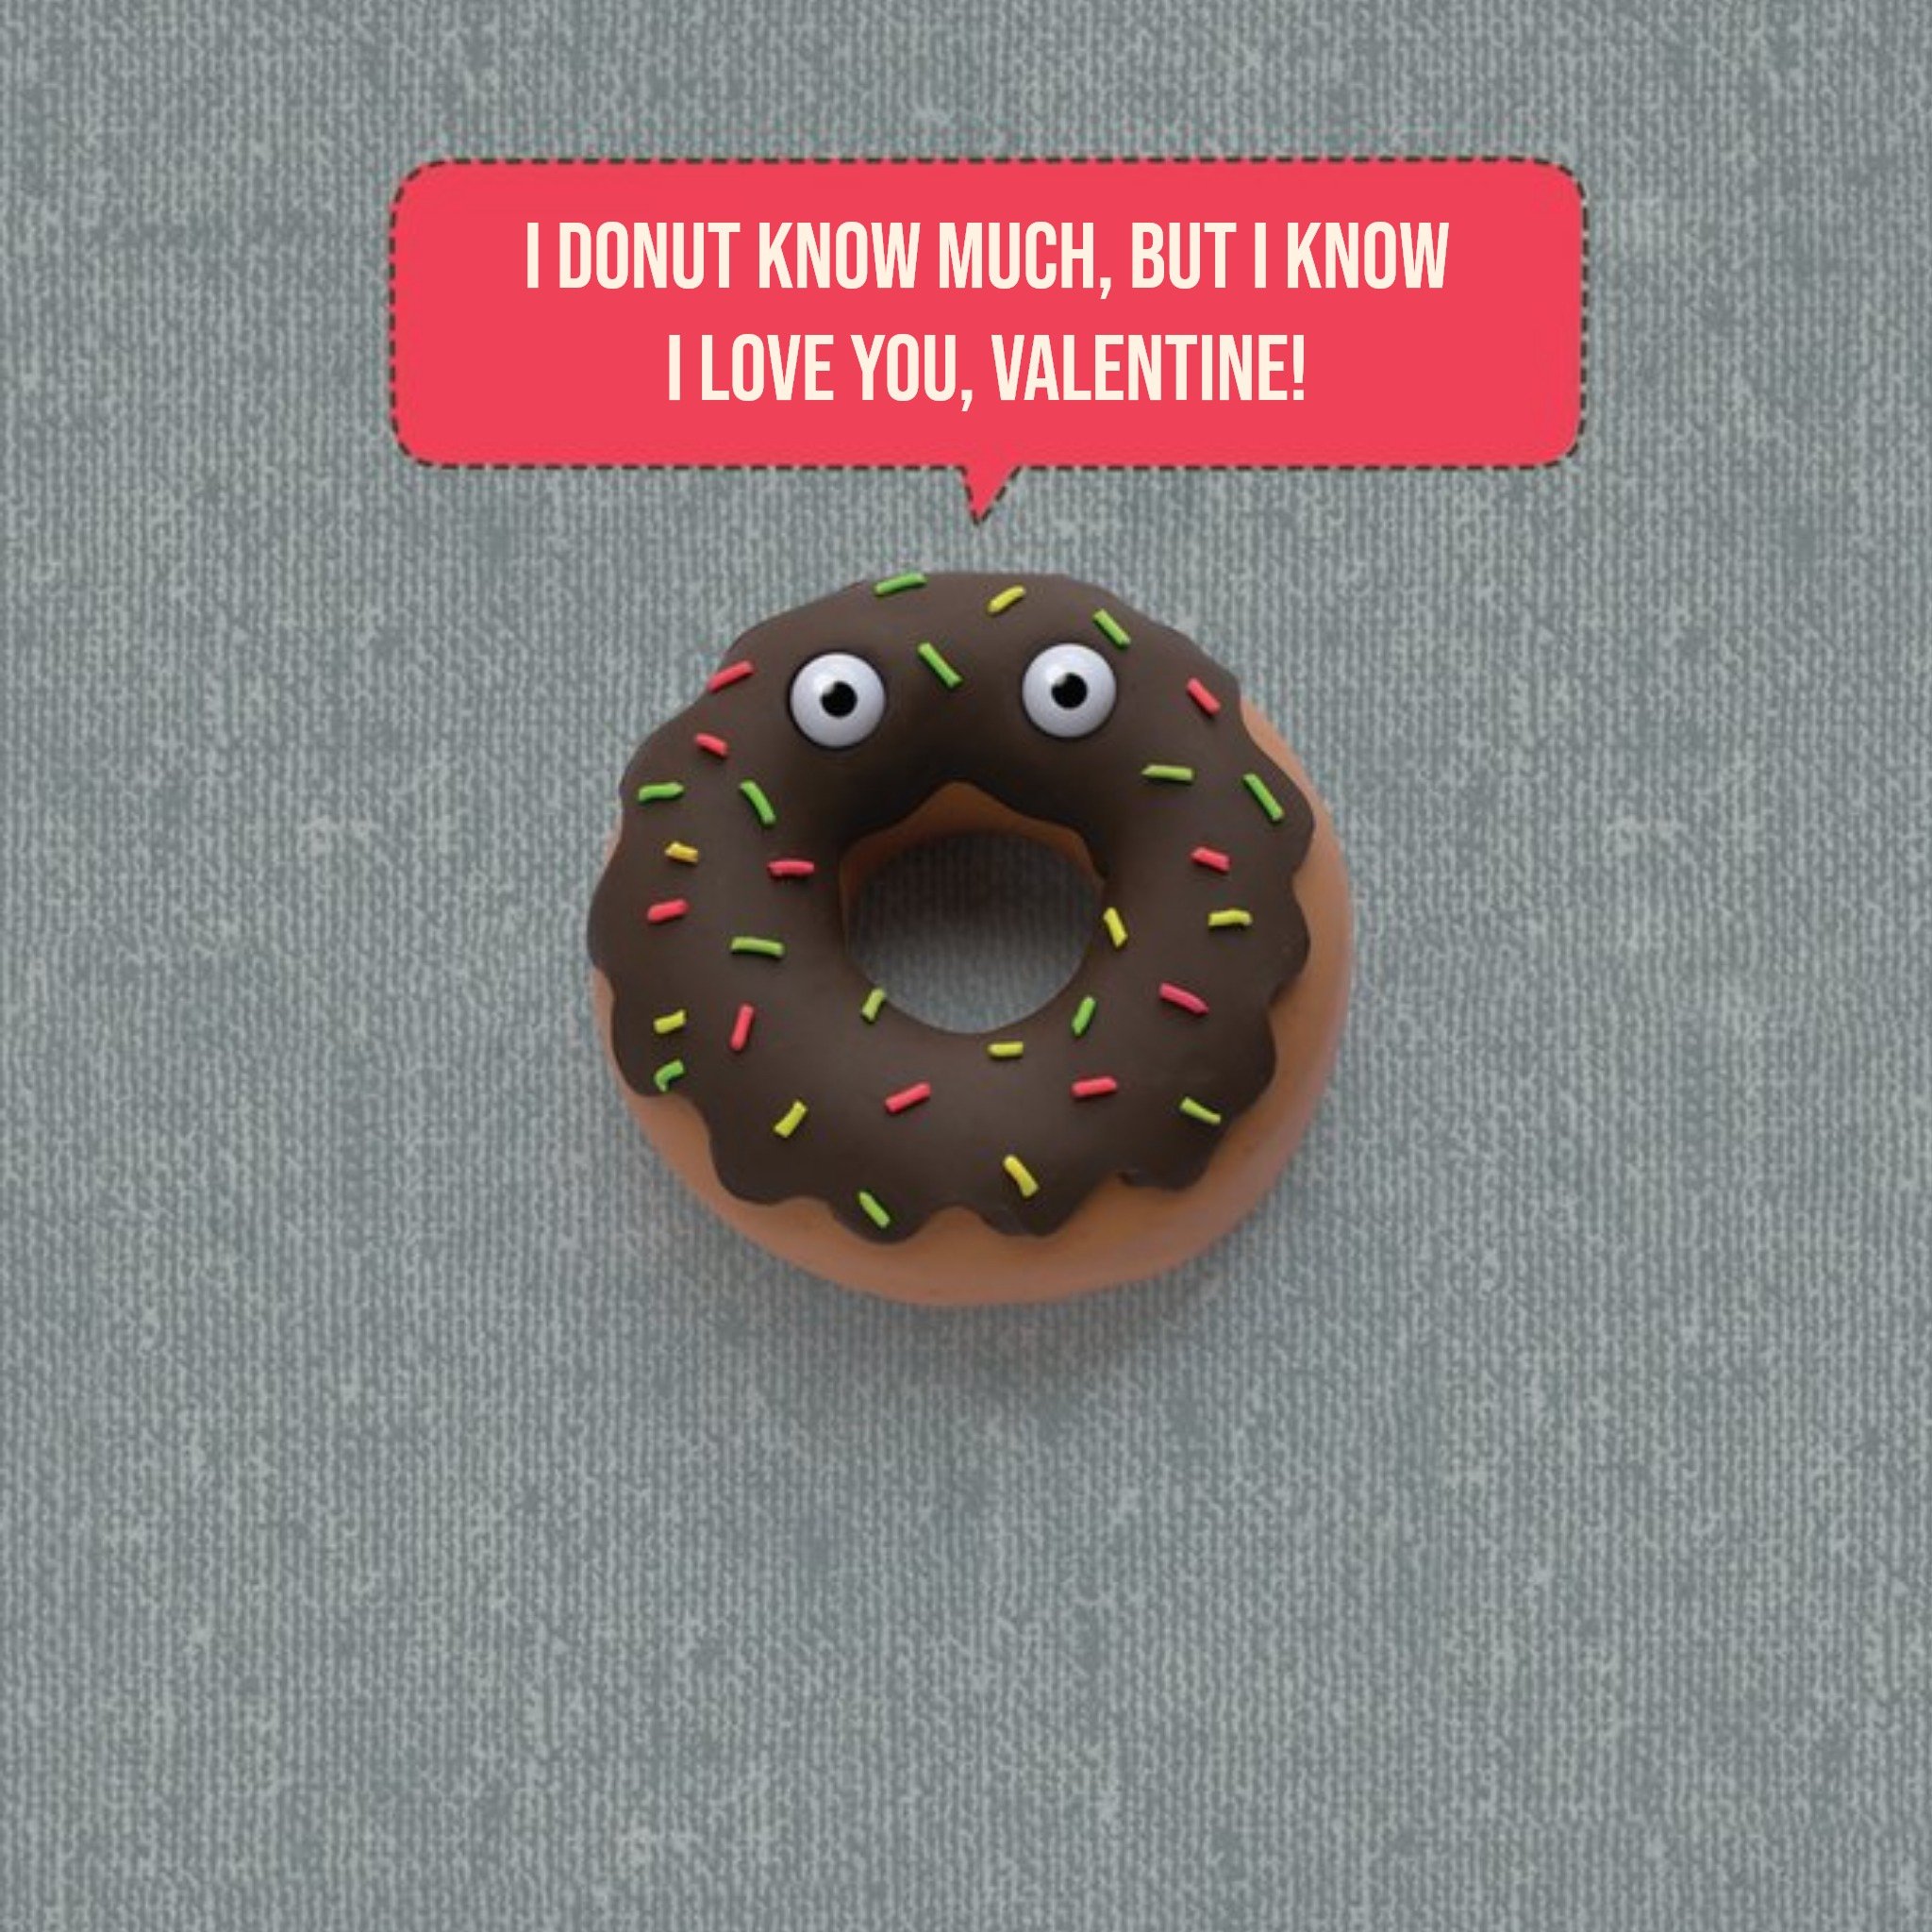 Moonpig I Donut Know Much, But I Know I Love You Funny Valentine's Day Card, Large